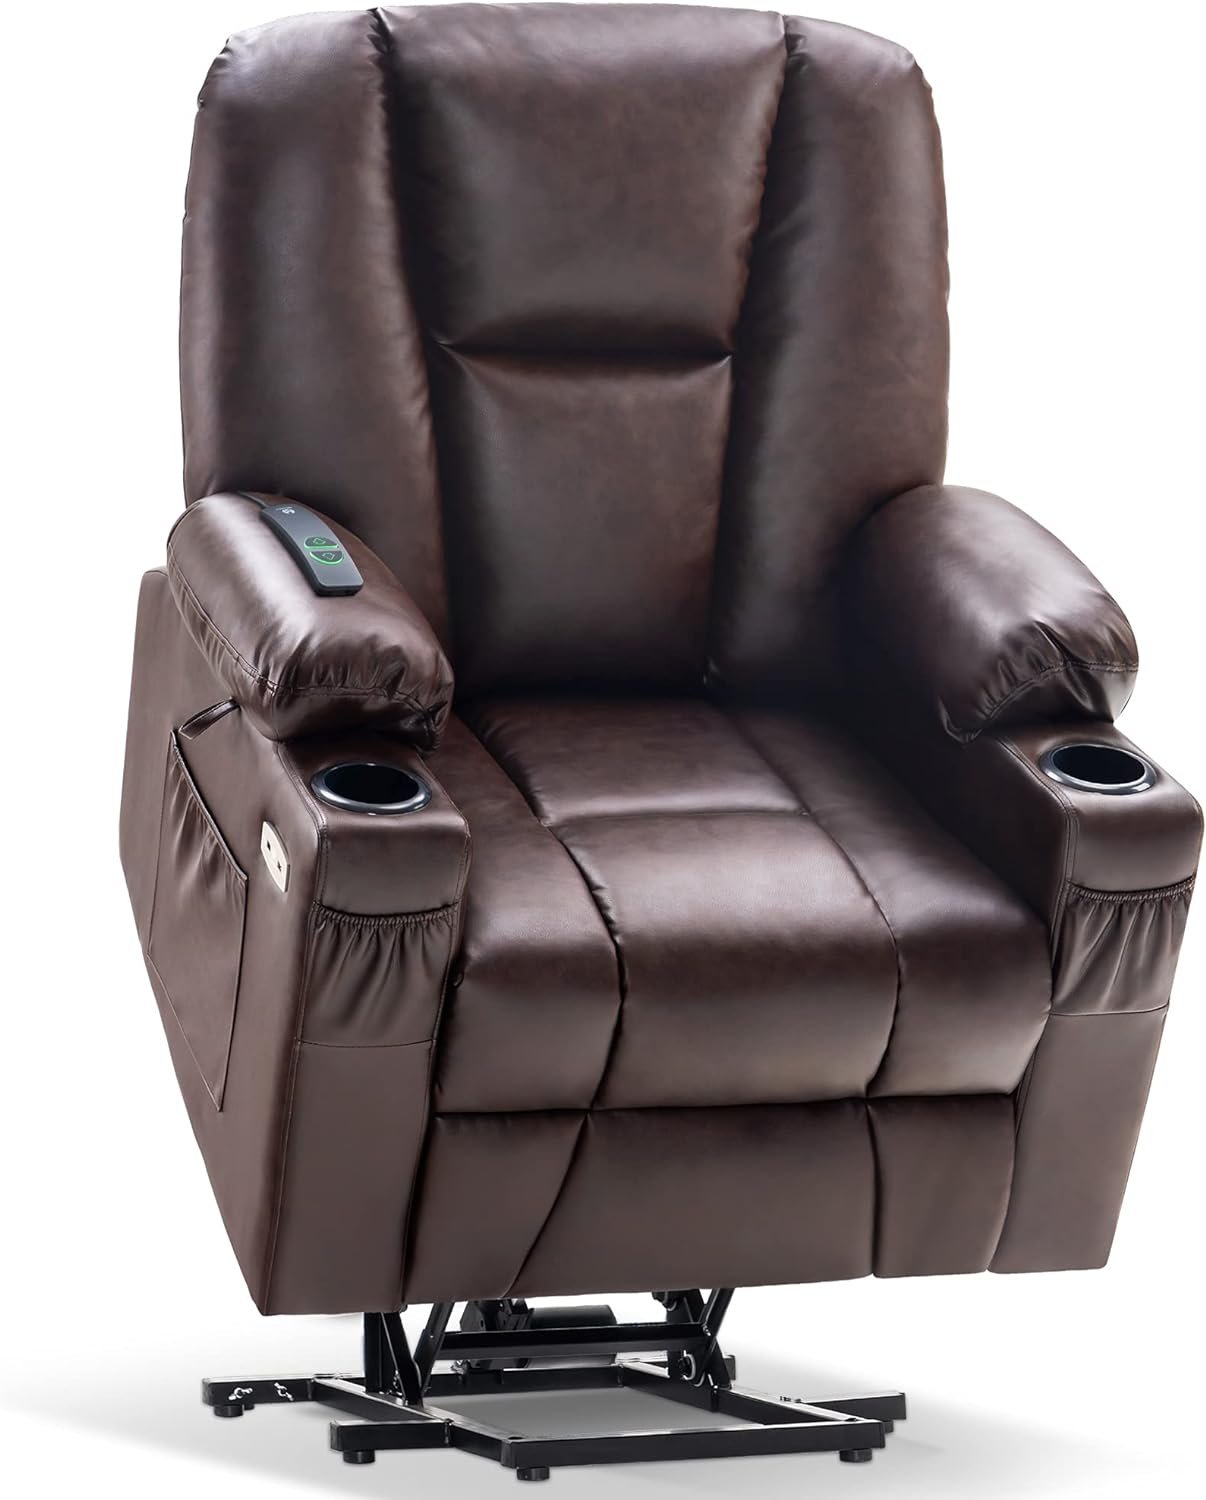 MCombo Electric Power Lift Recliner Chair with Extended Footrest for Elderly People, 3 Positions, Hand Remote Control, Lumbar Pillow, 2 Cup Holders, USB Ports, Faux Leather 7507 (Dark Brown)